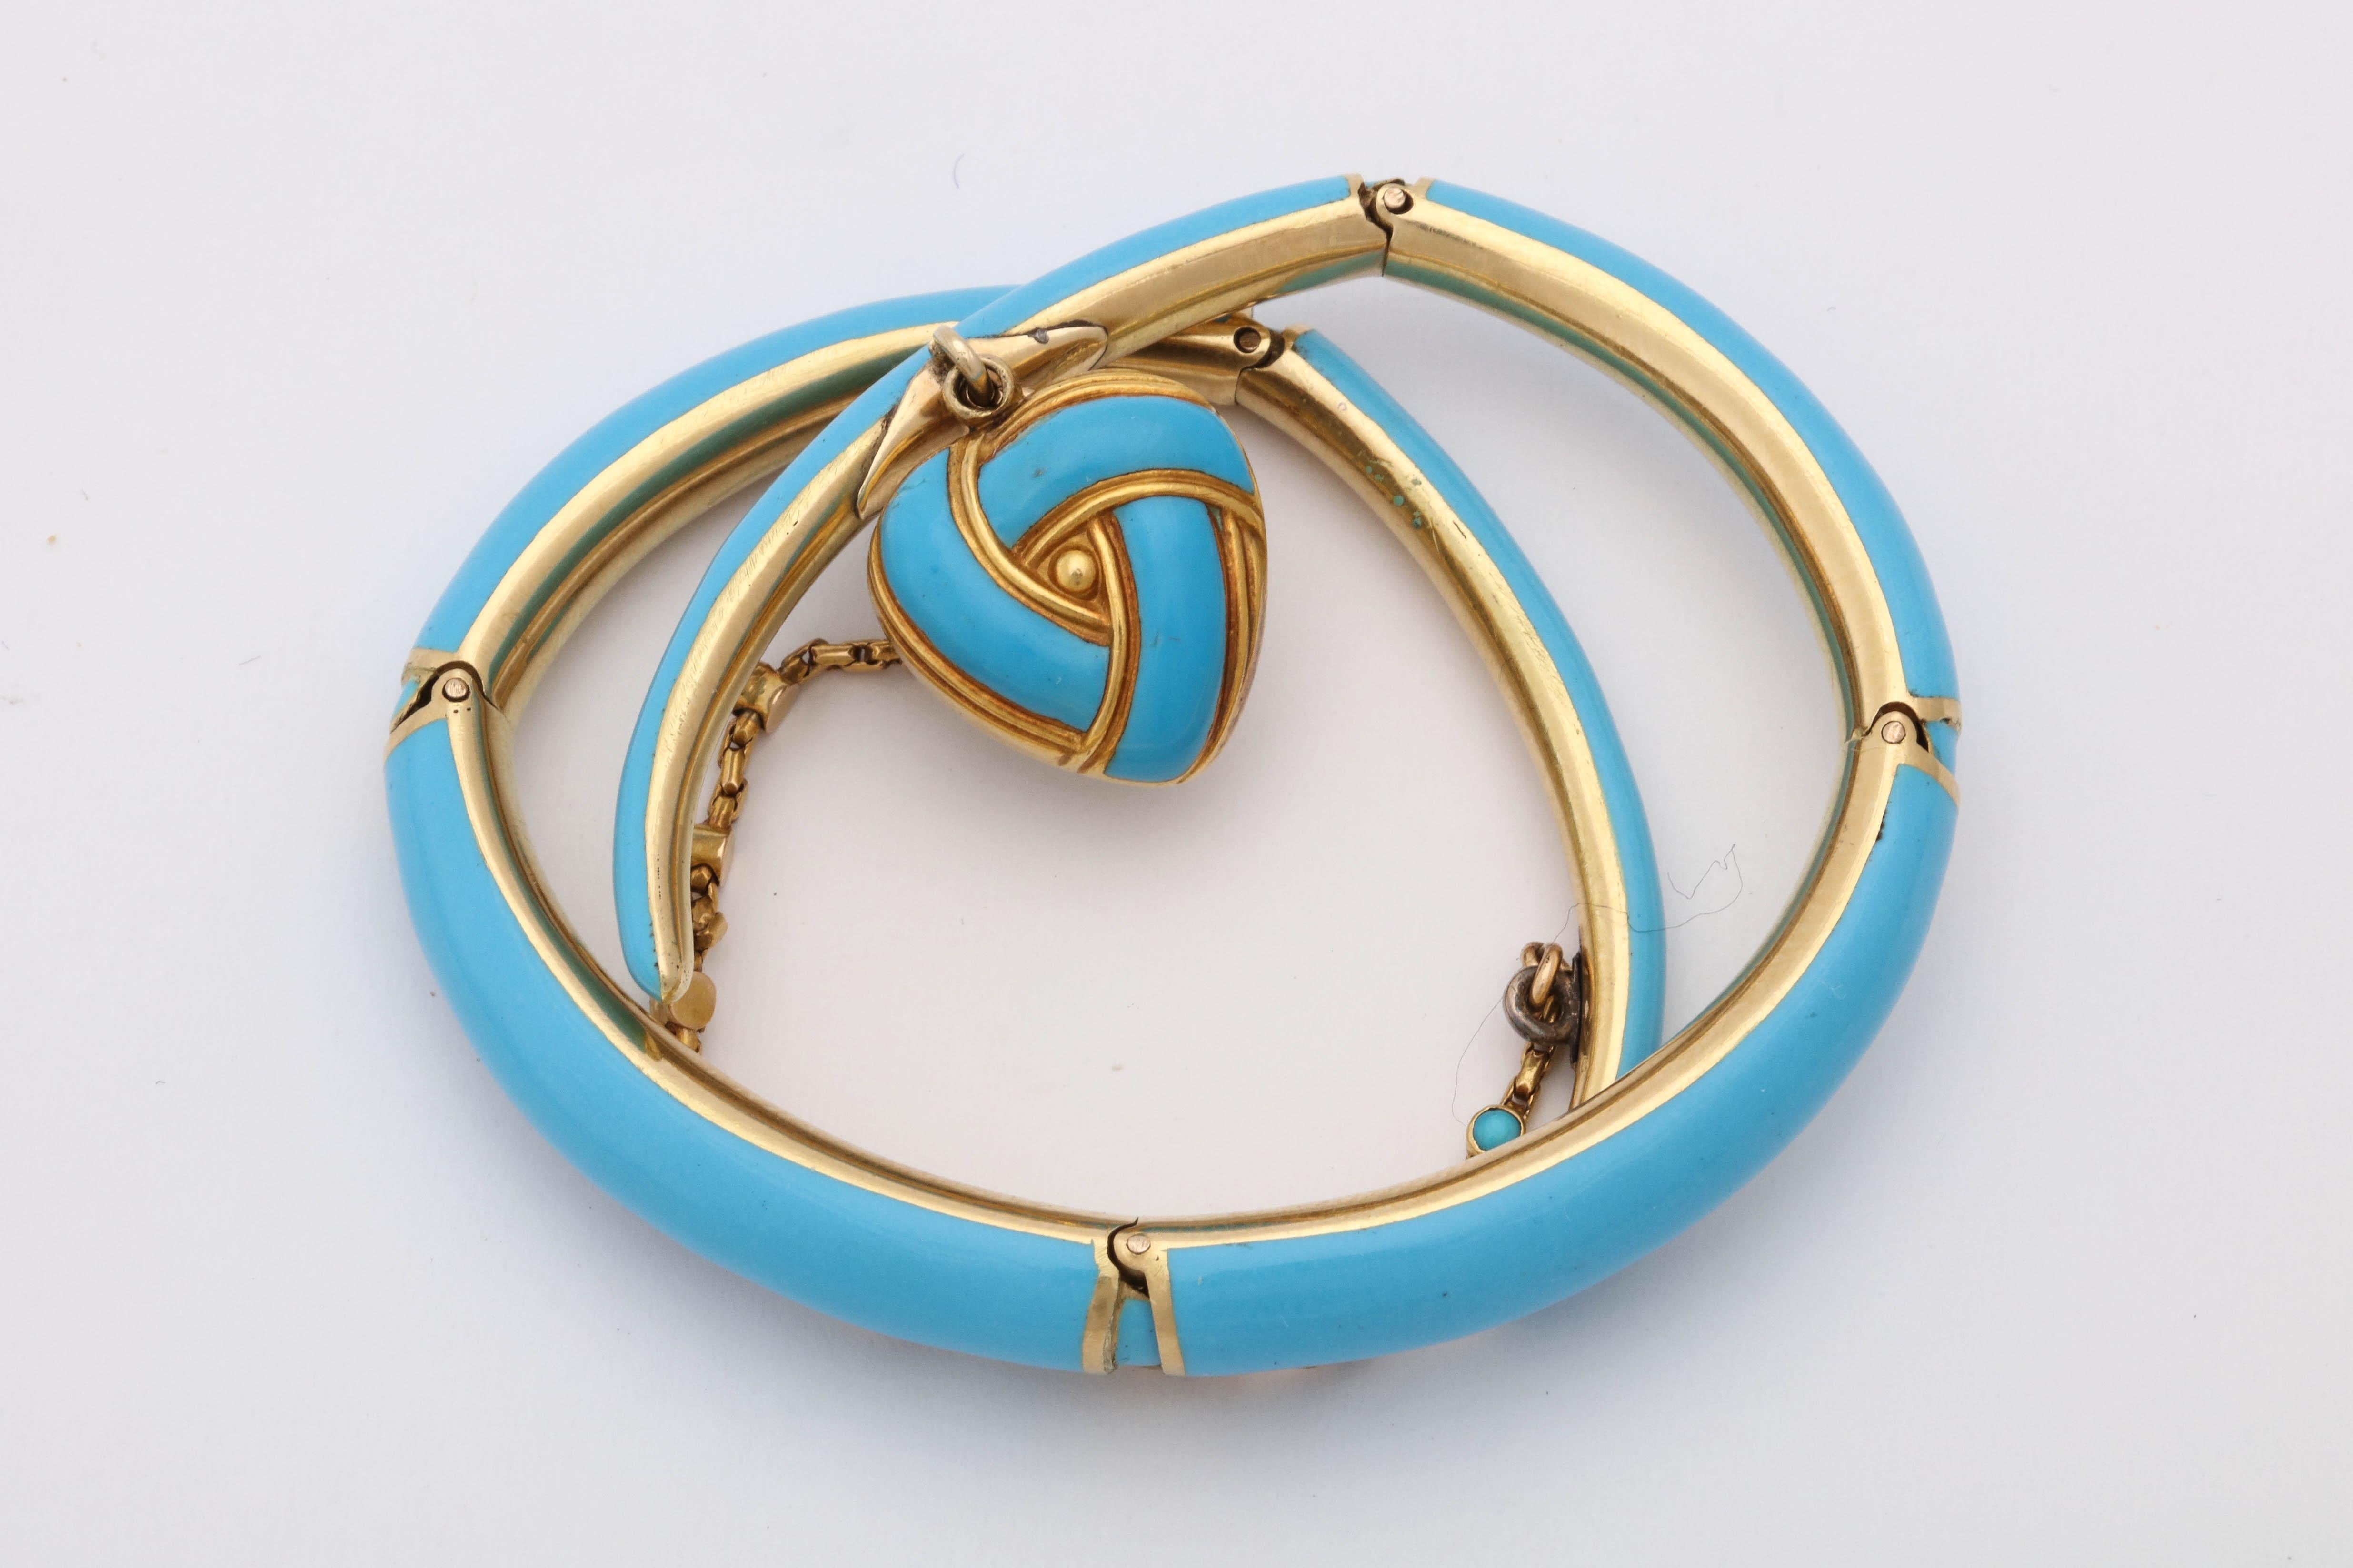 One 18kt Yellow Gold Wrap Around Bracelet Designed With Turquoise Color Blue Enamel Thruout The Bracelet. A Beautiful Handmade Heart Locket Is Dangling From The Front Of Bracelet With A Natural Pearl In The Center Of It. The Delicate Safety Chain Is